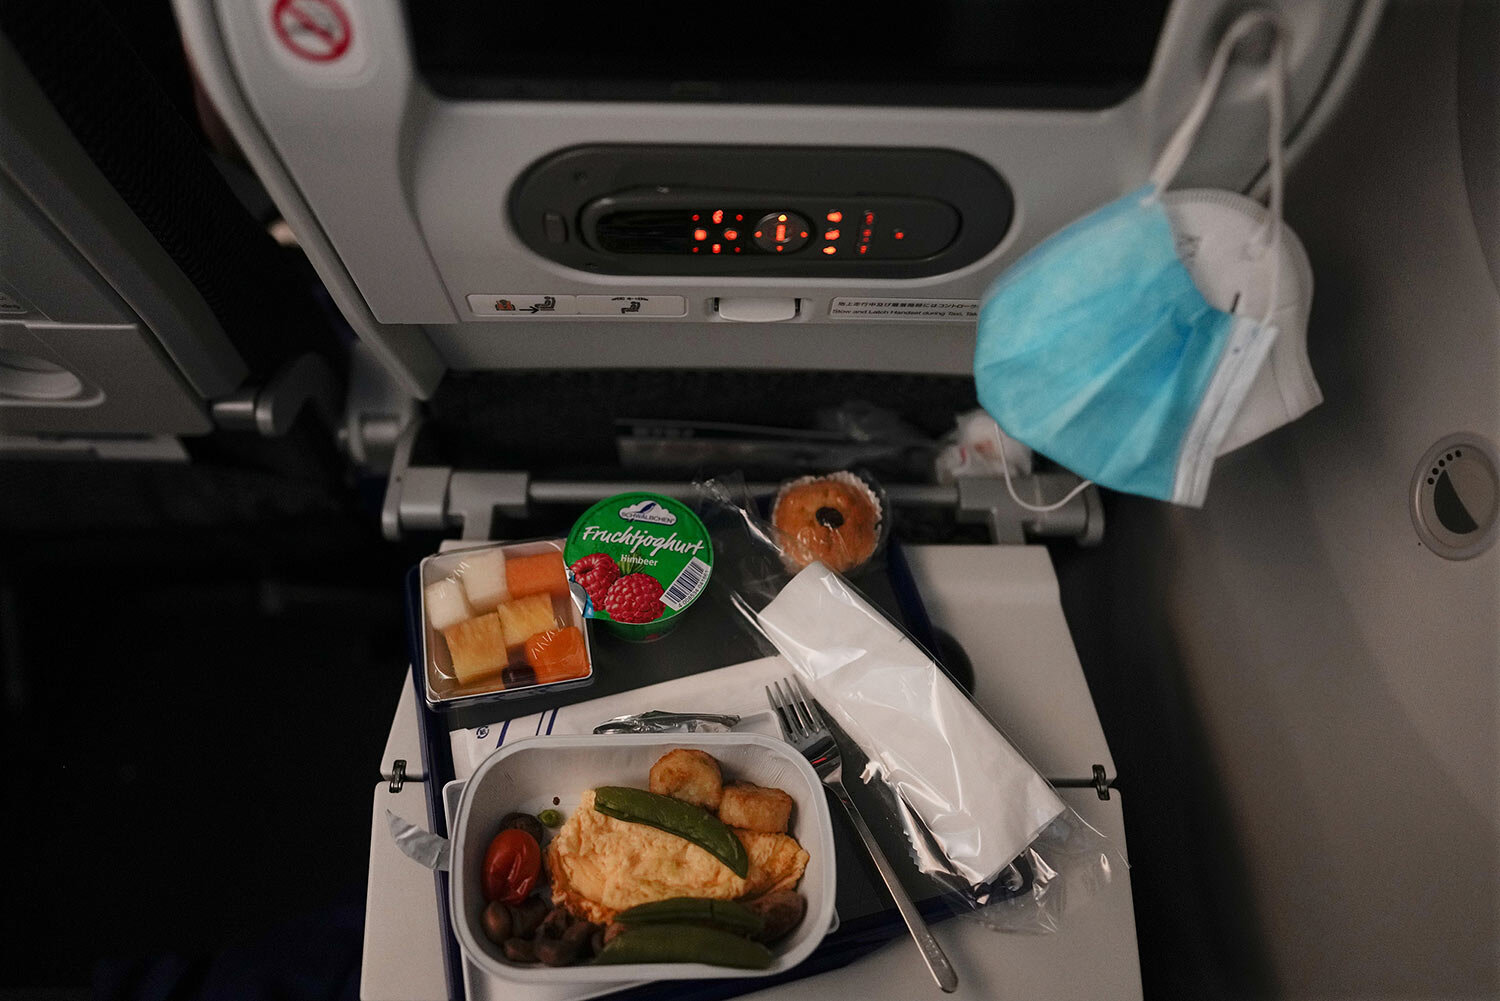  A breakfast sits in front of face masks on a tray table during a flight to Tokyo from Frankfurt, Germany, Monday, July 19, 2021. (AP Photo/Natacha Pisarenko) 